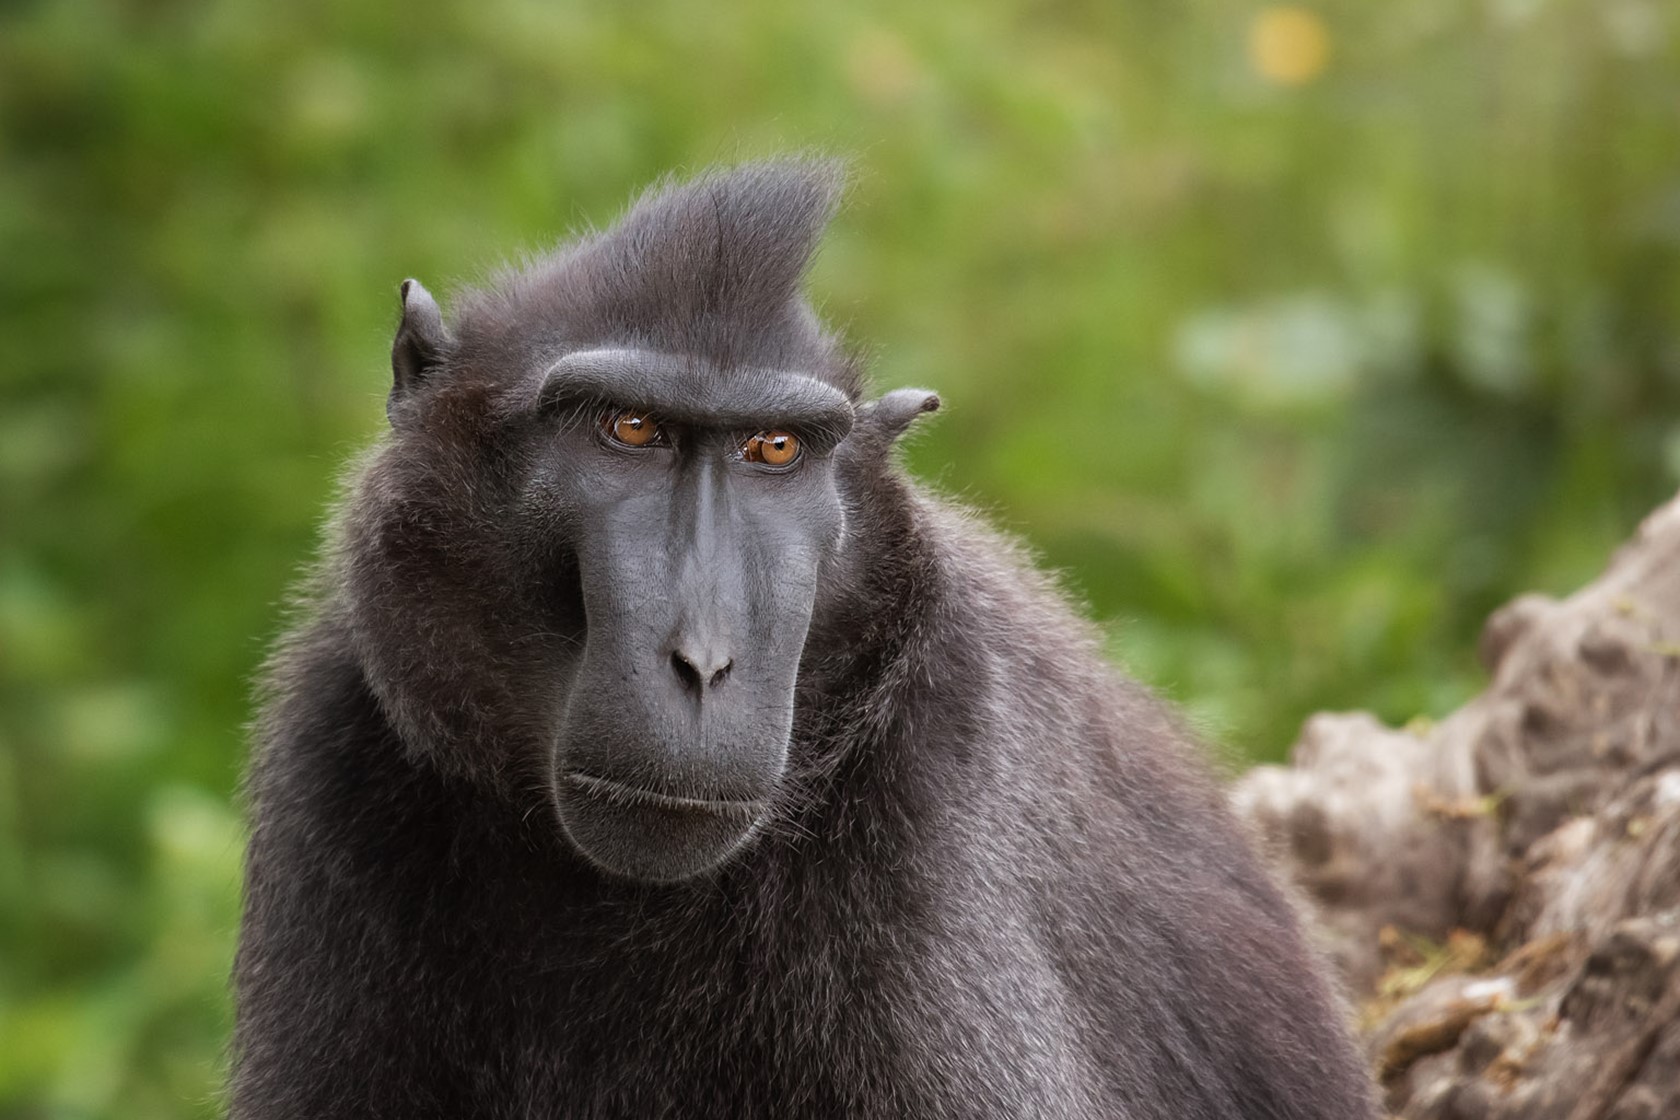 Sulawesi Crested Macaque at Jersey Zoo